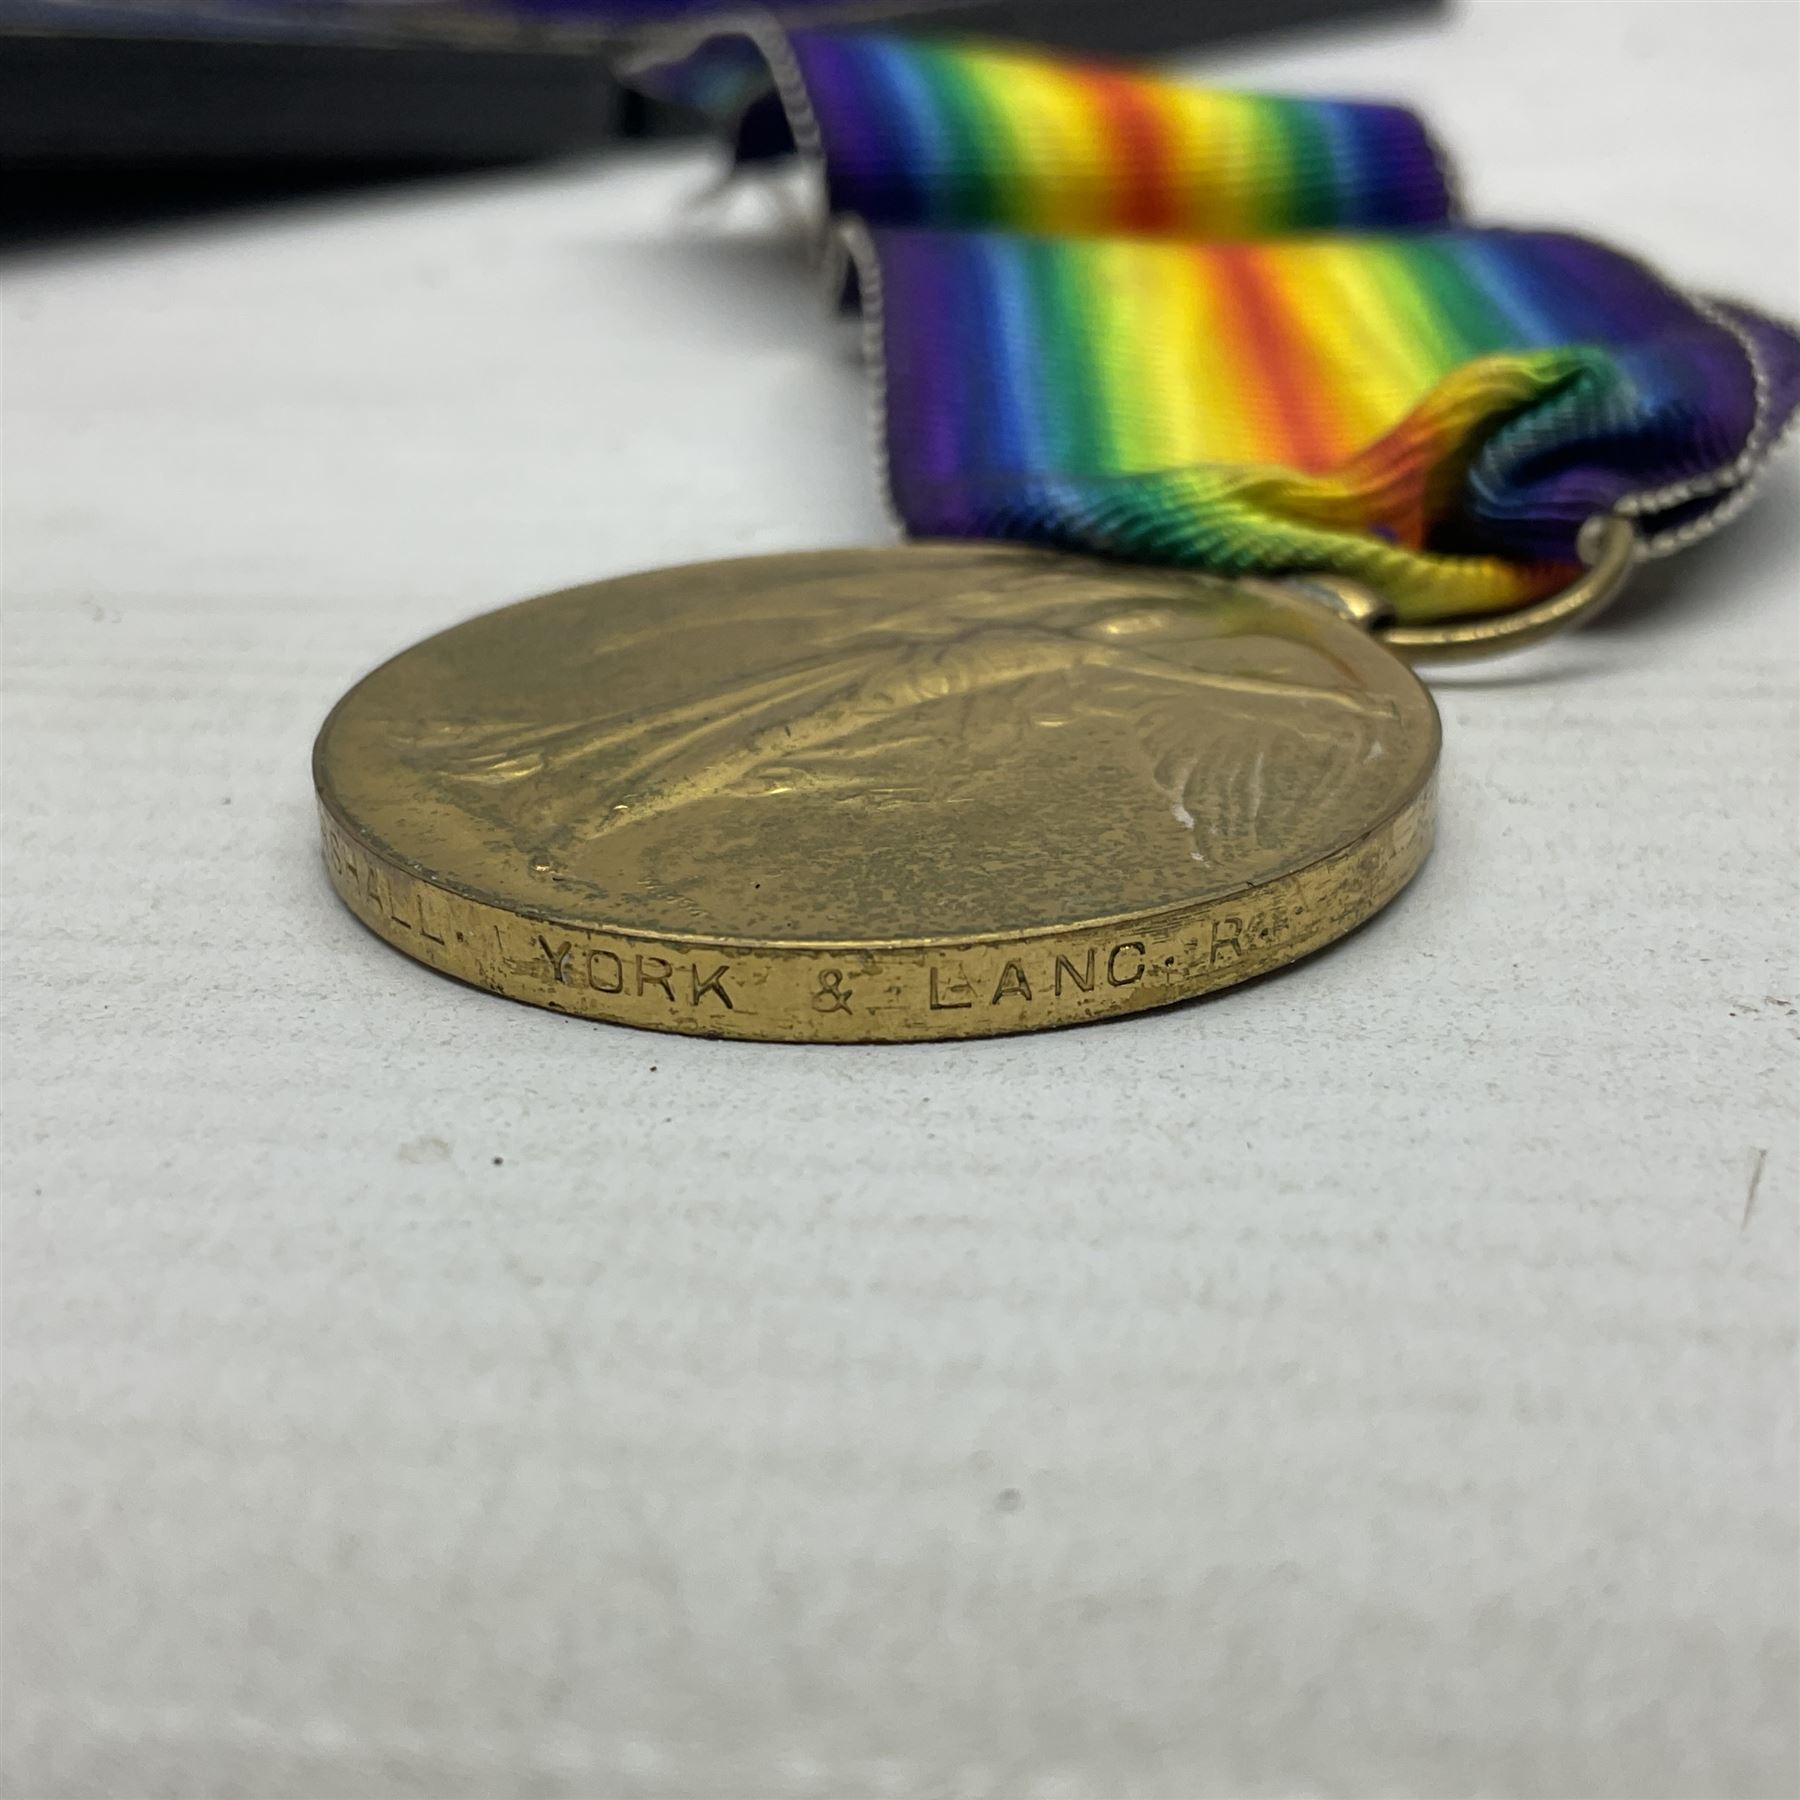 WWI pair of medals comprising British War Medal and Victory Medal awarded to 12-1379 Pte. H. Marshal - Image 15 of 18